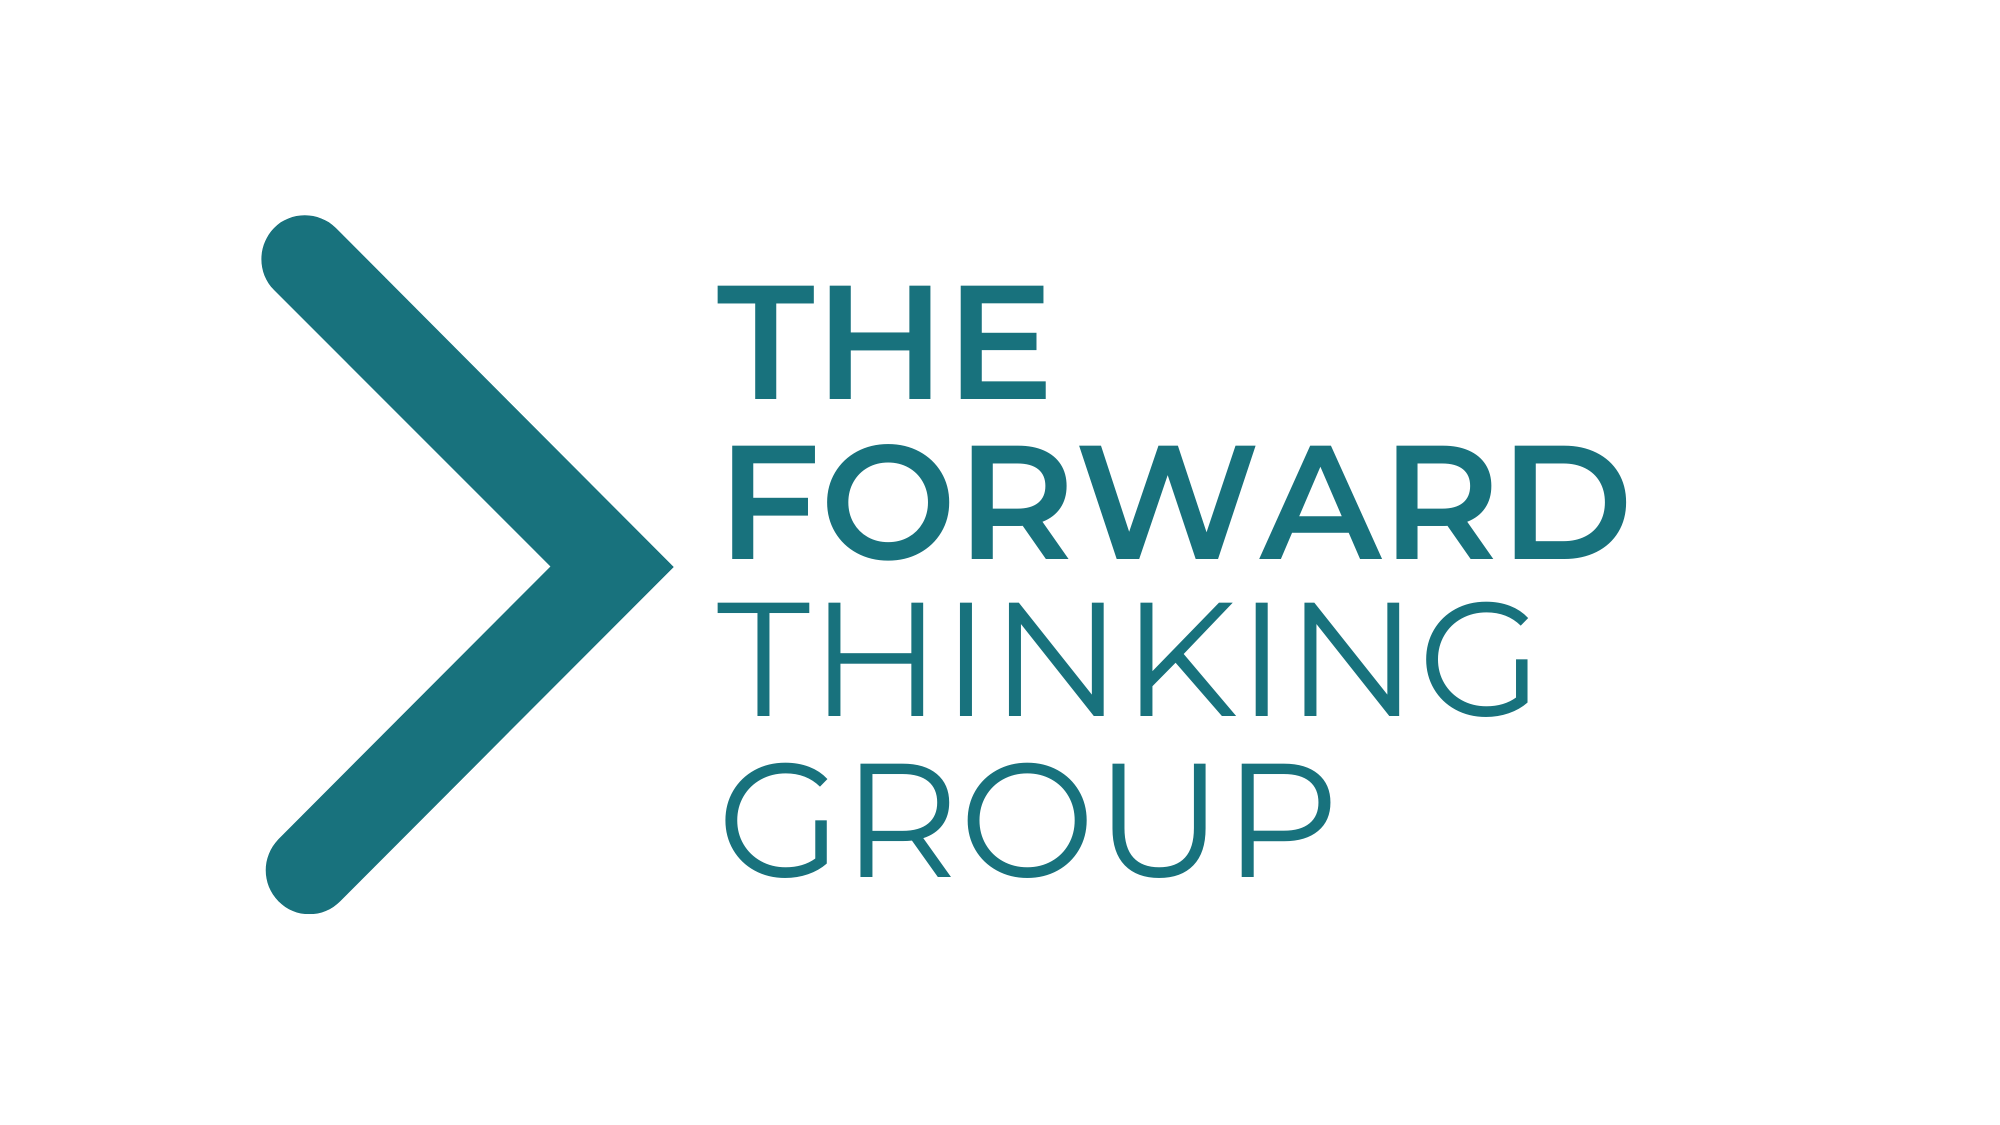 The Forward Thinking Group